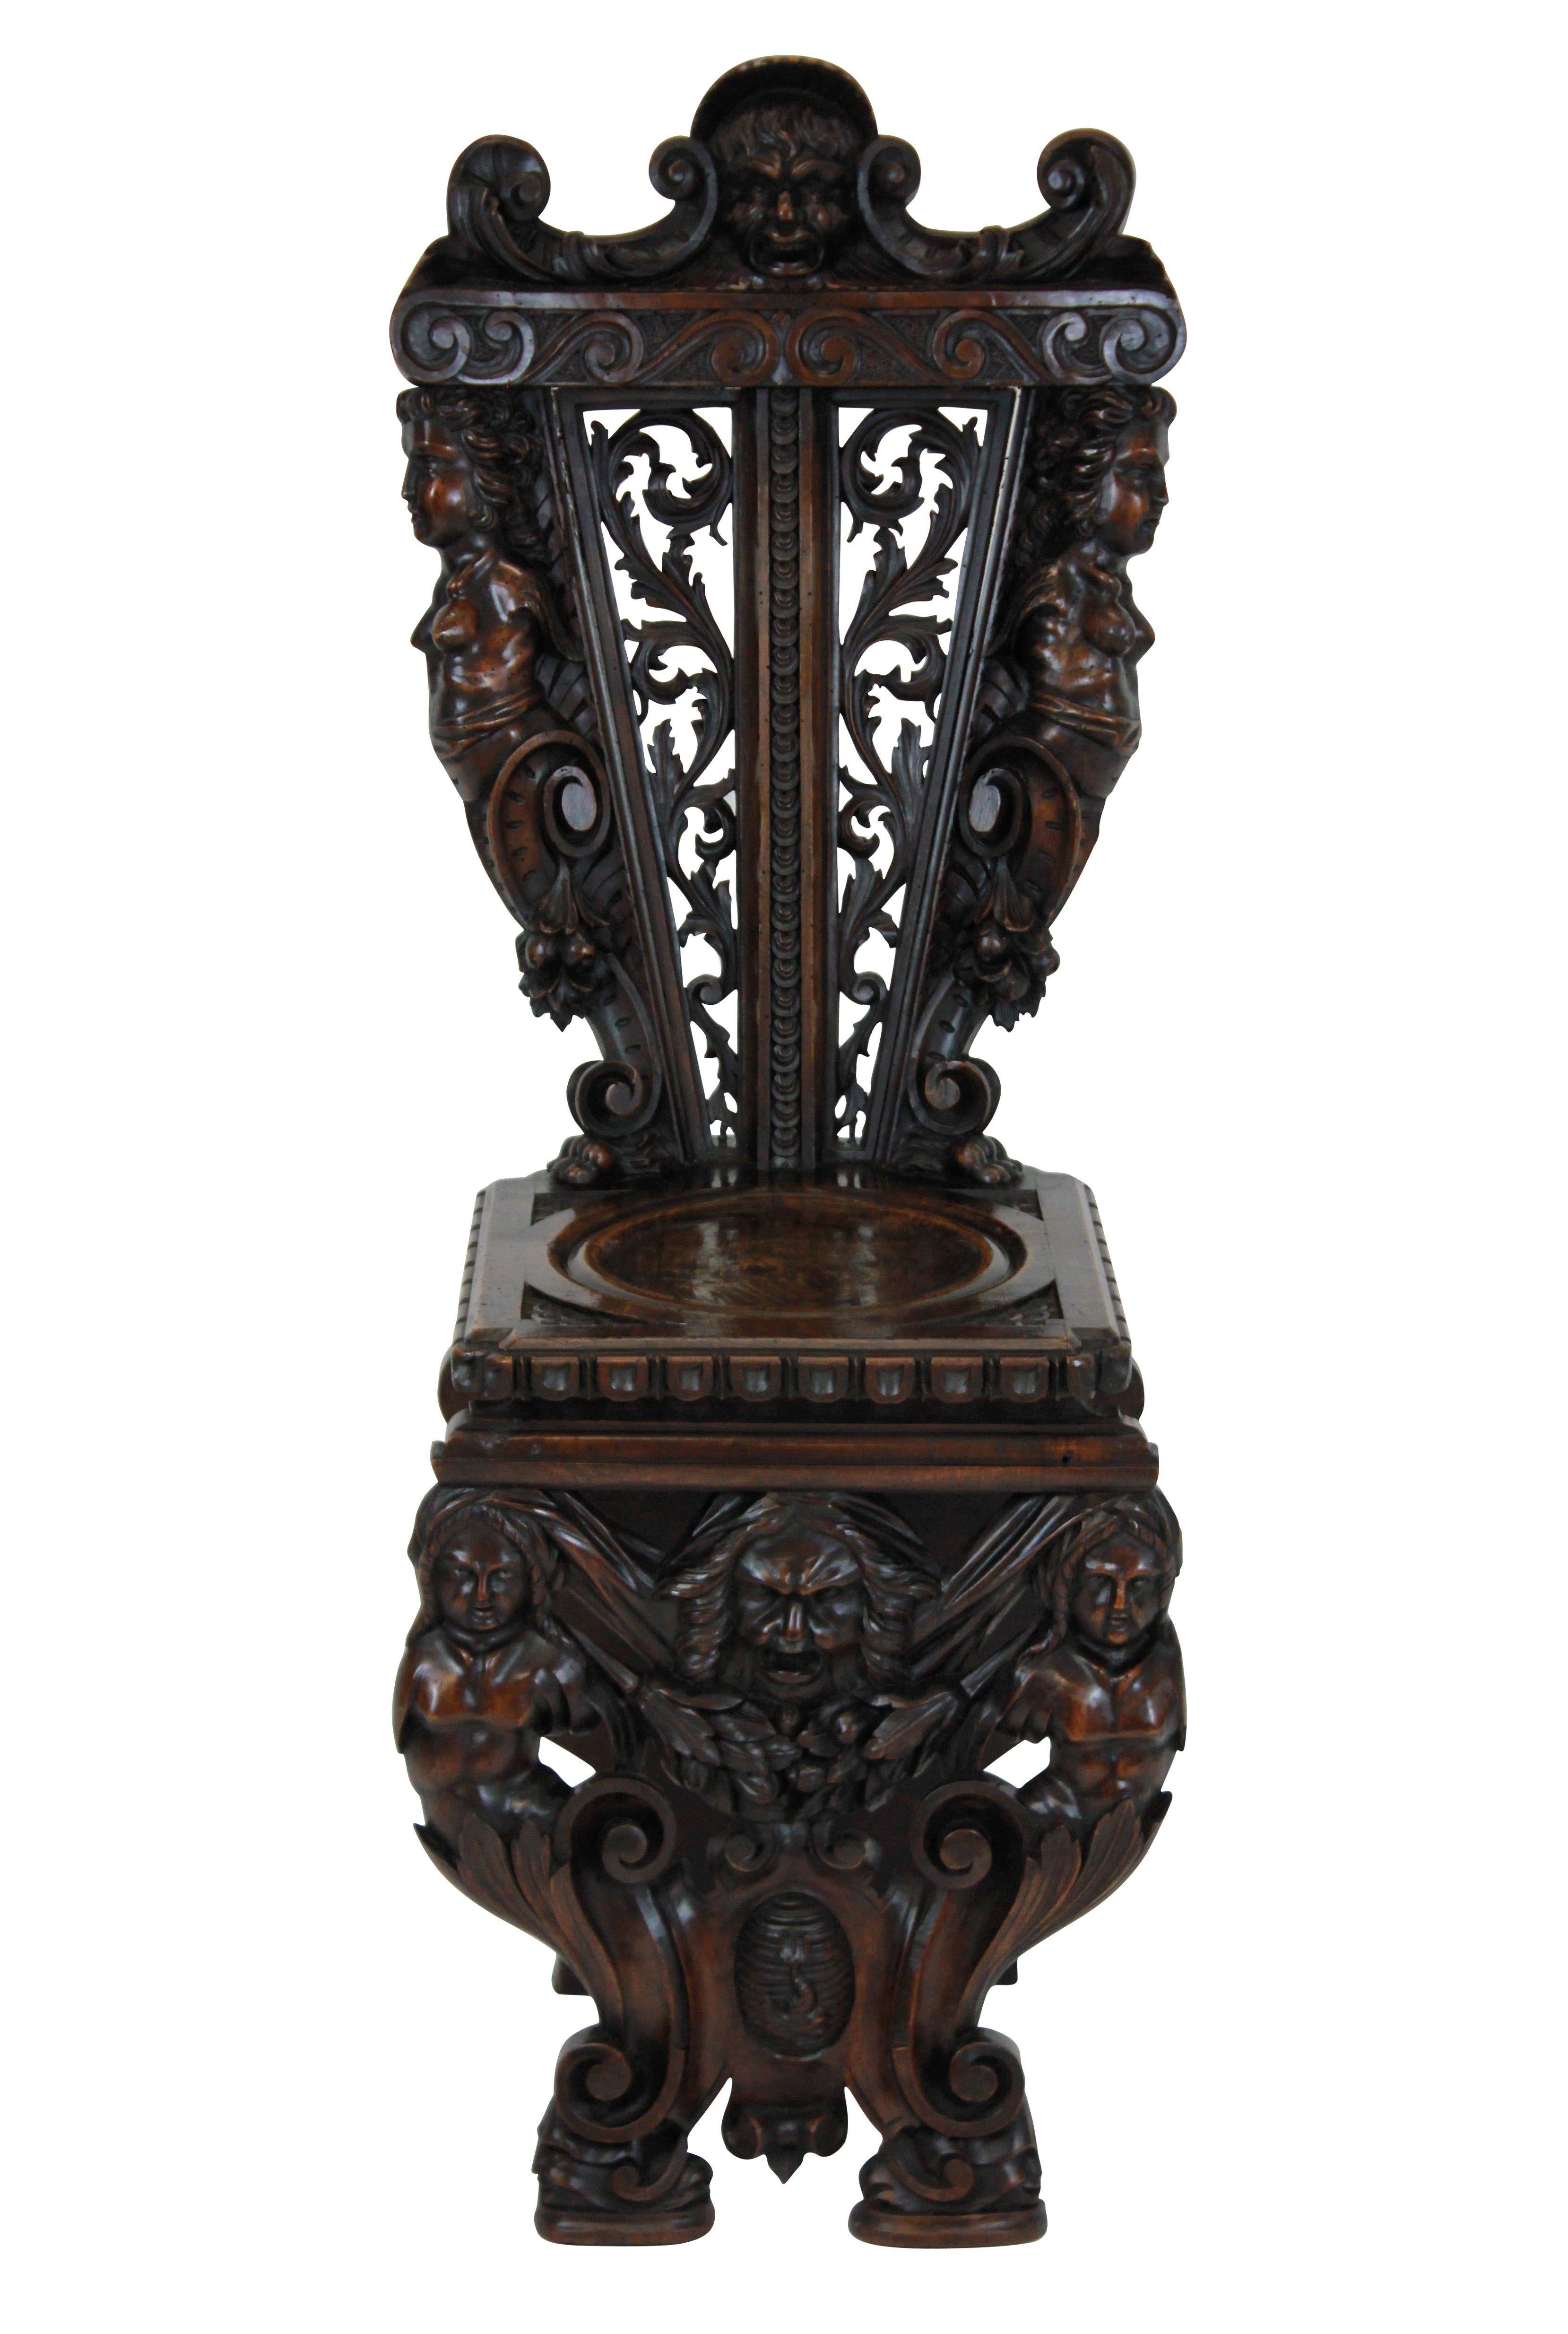 A pair of fine early 19th century Italian carved walnut hall chairs in the Renaissance style. Profusely and beautifully carved with foliage, caryatids and a coat of arms.

 